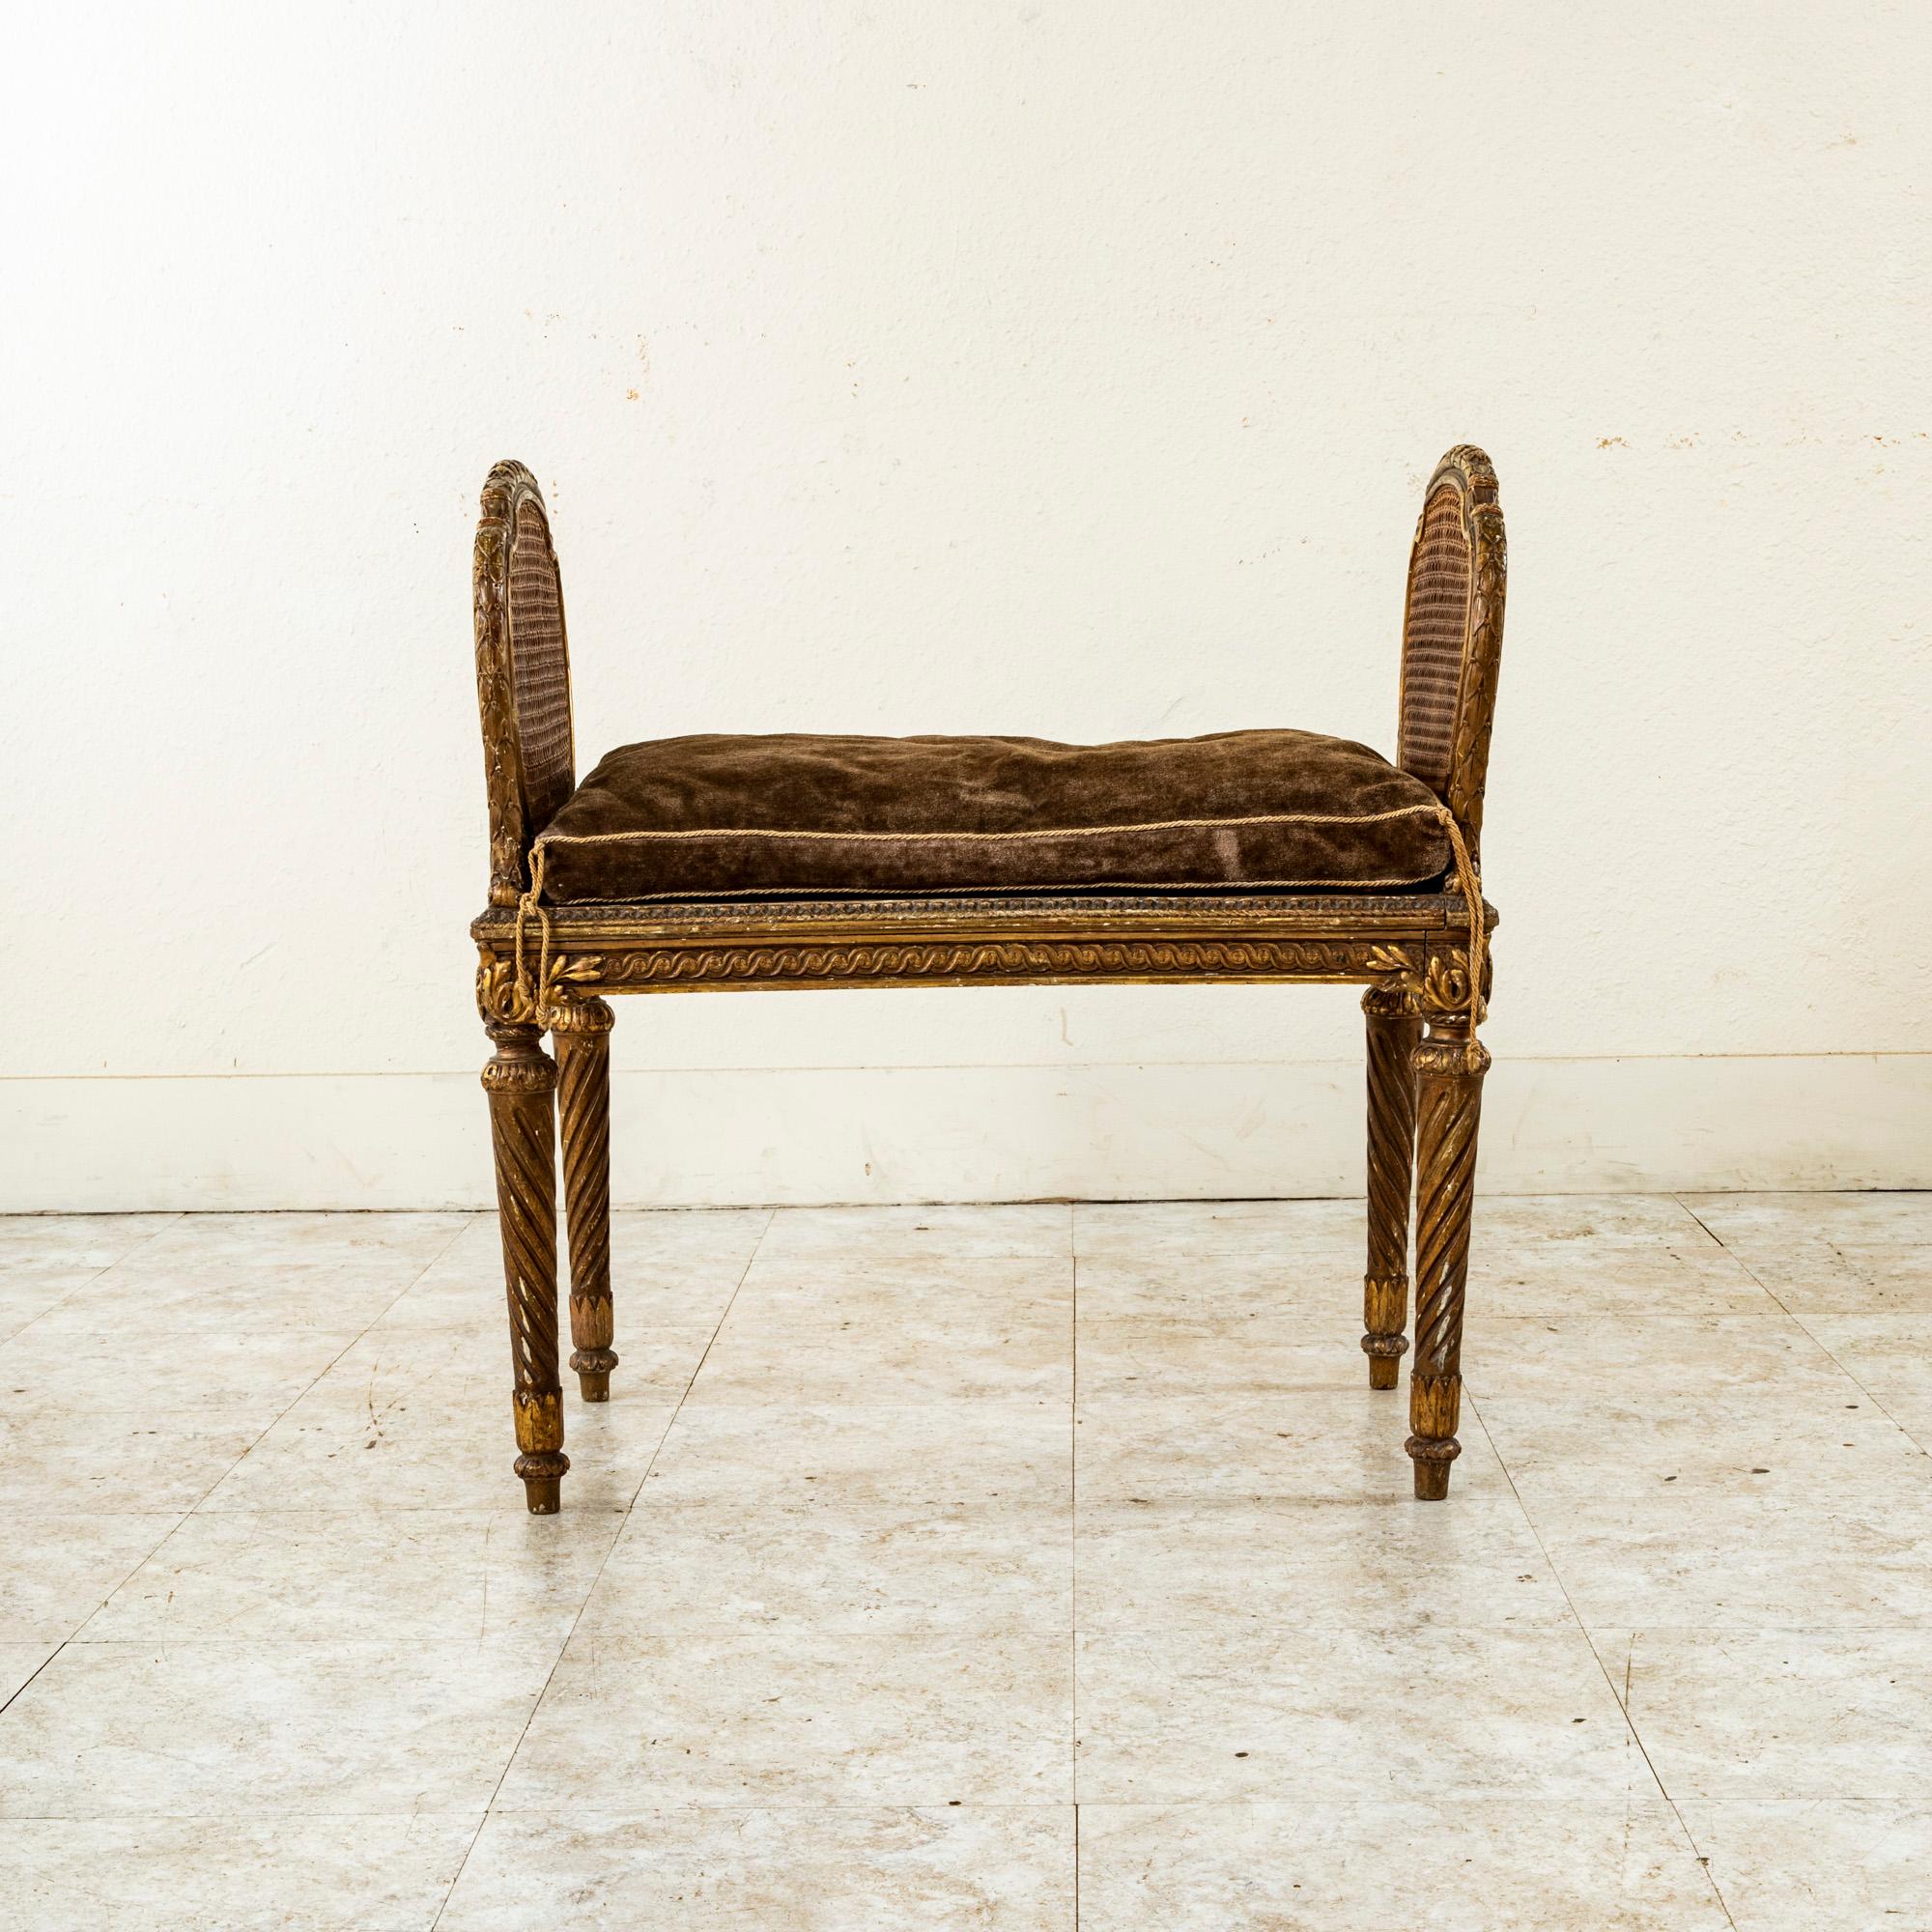 Upholstery Mid-19th Century Italian Giltwood and Cane Vanity Bench or Stool 